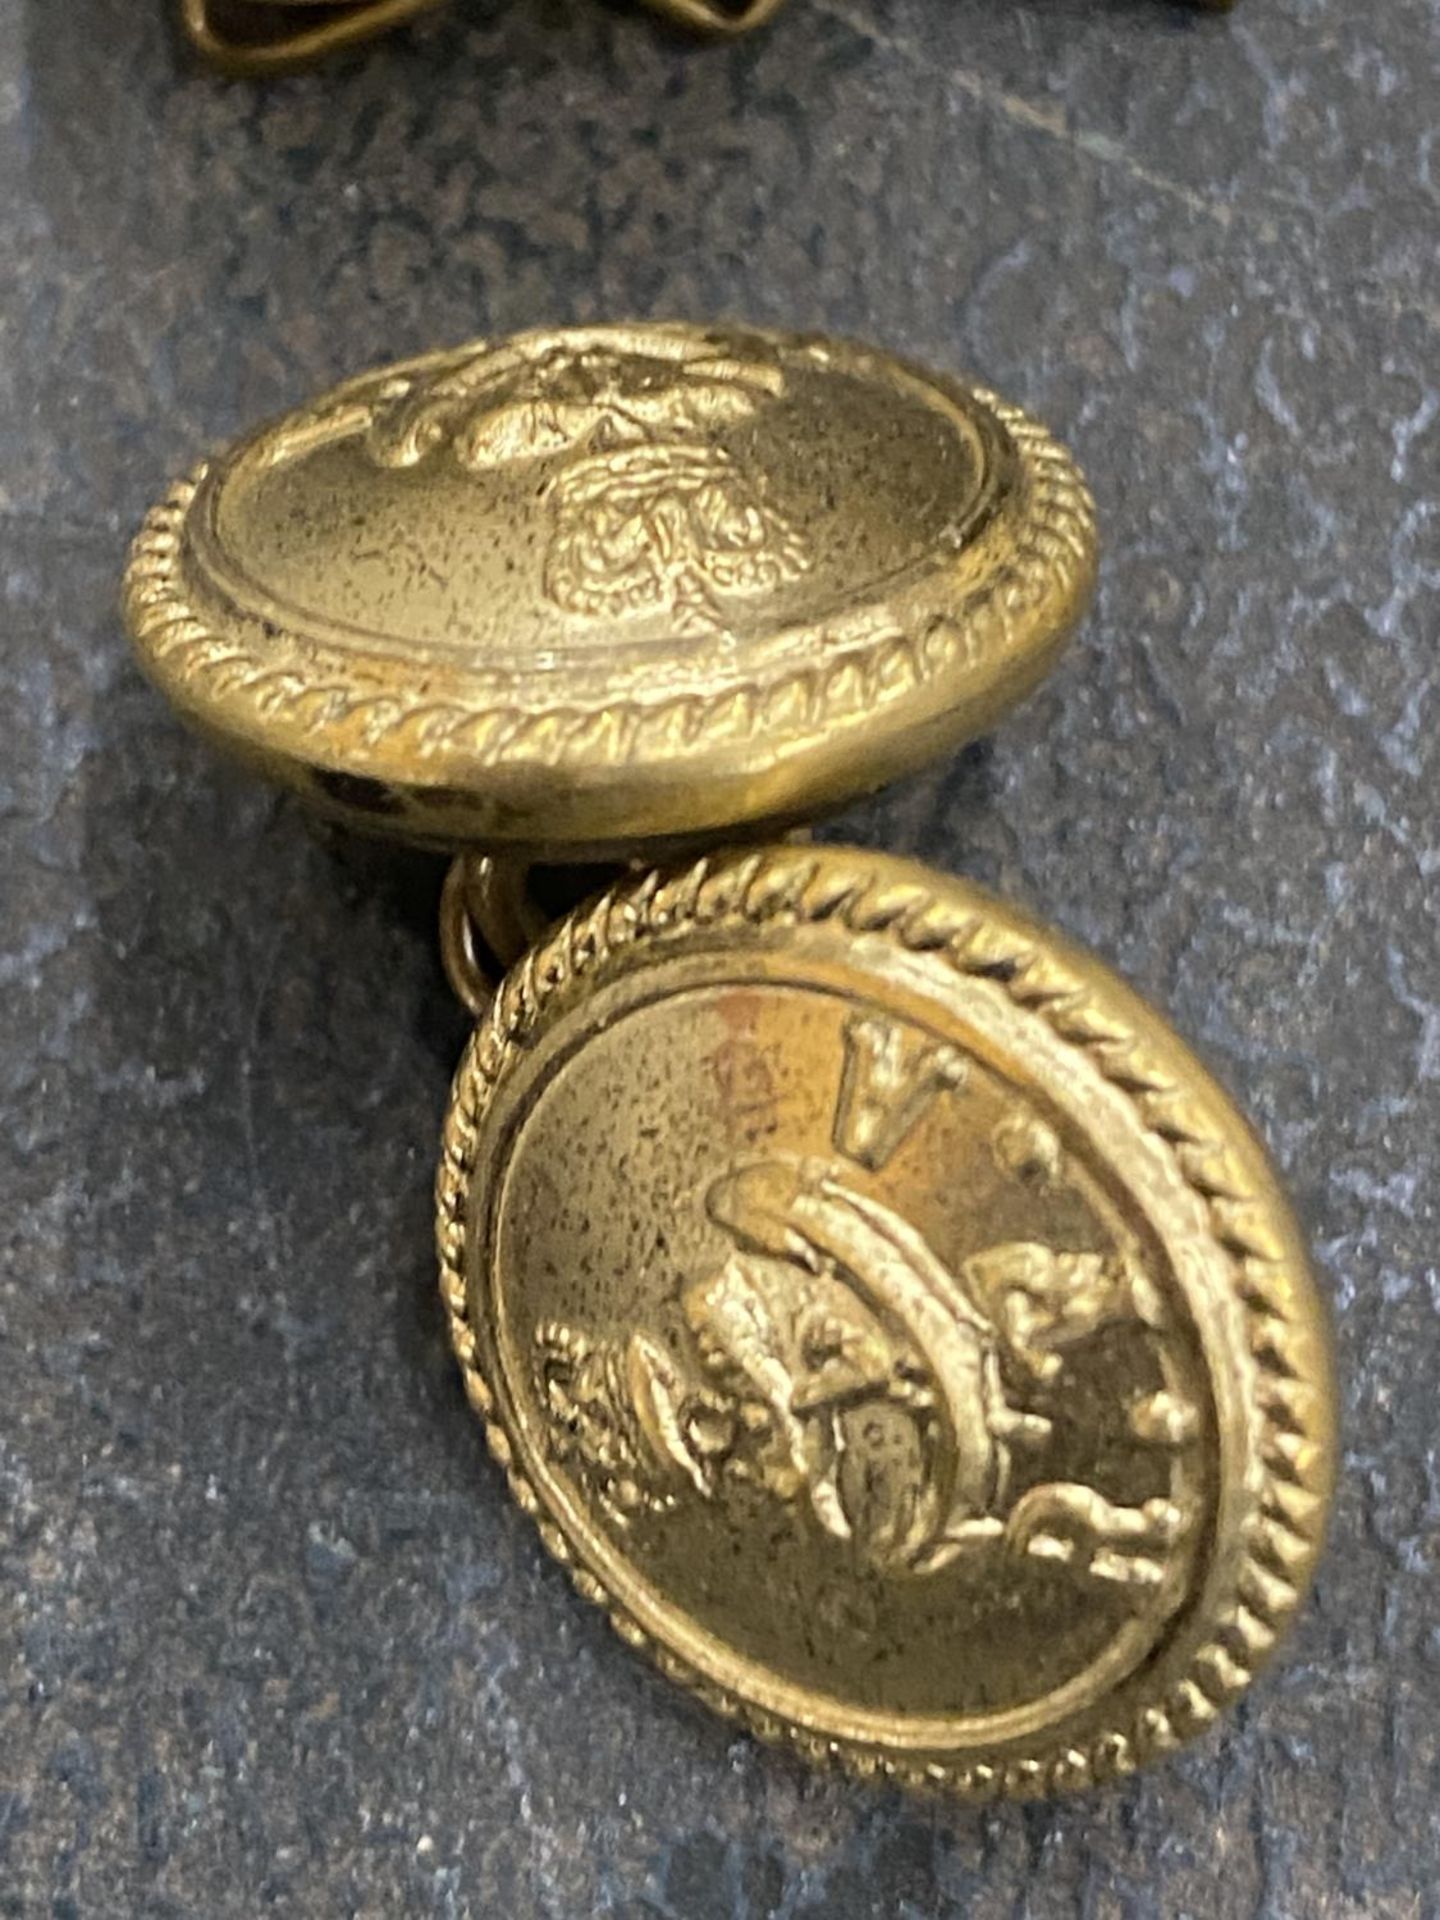 TEN ROYAL NAVY BRASS BUTTONS - Image 2 of 2